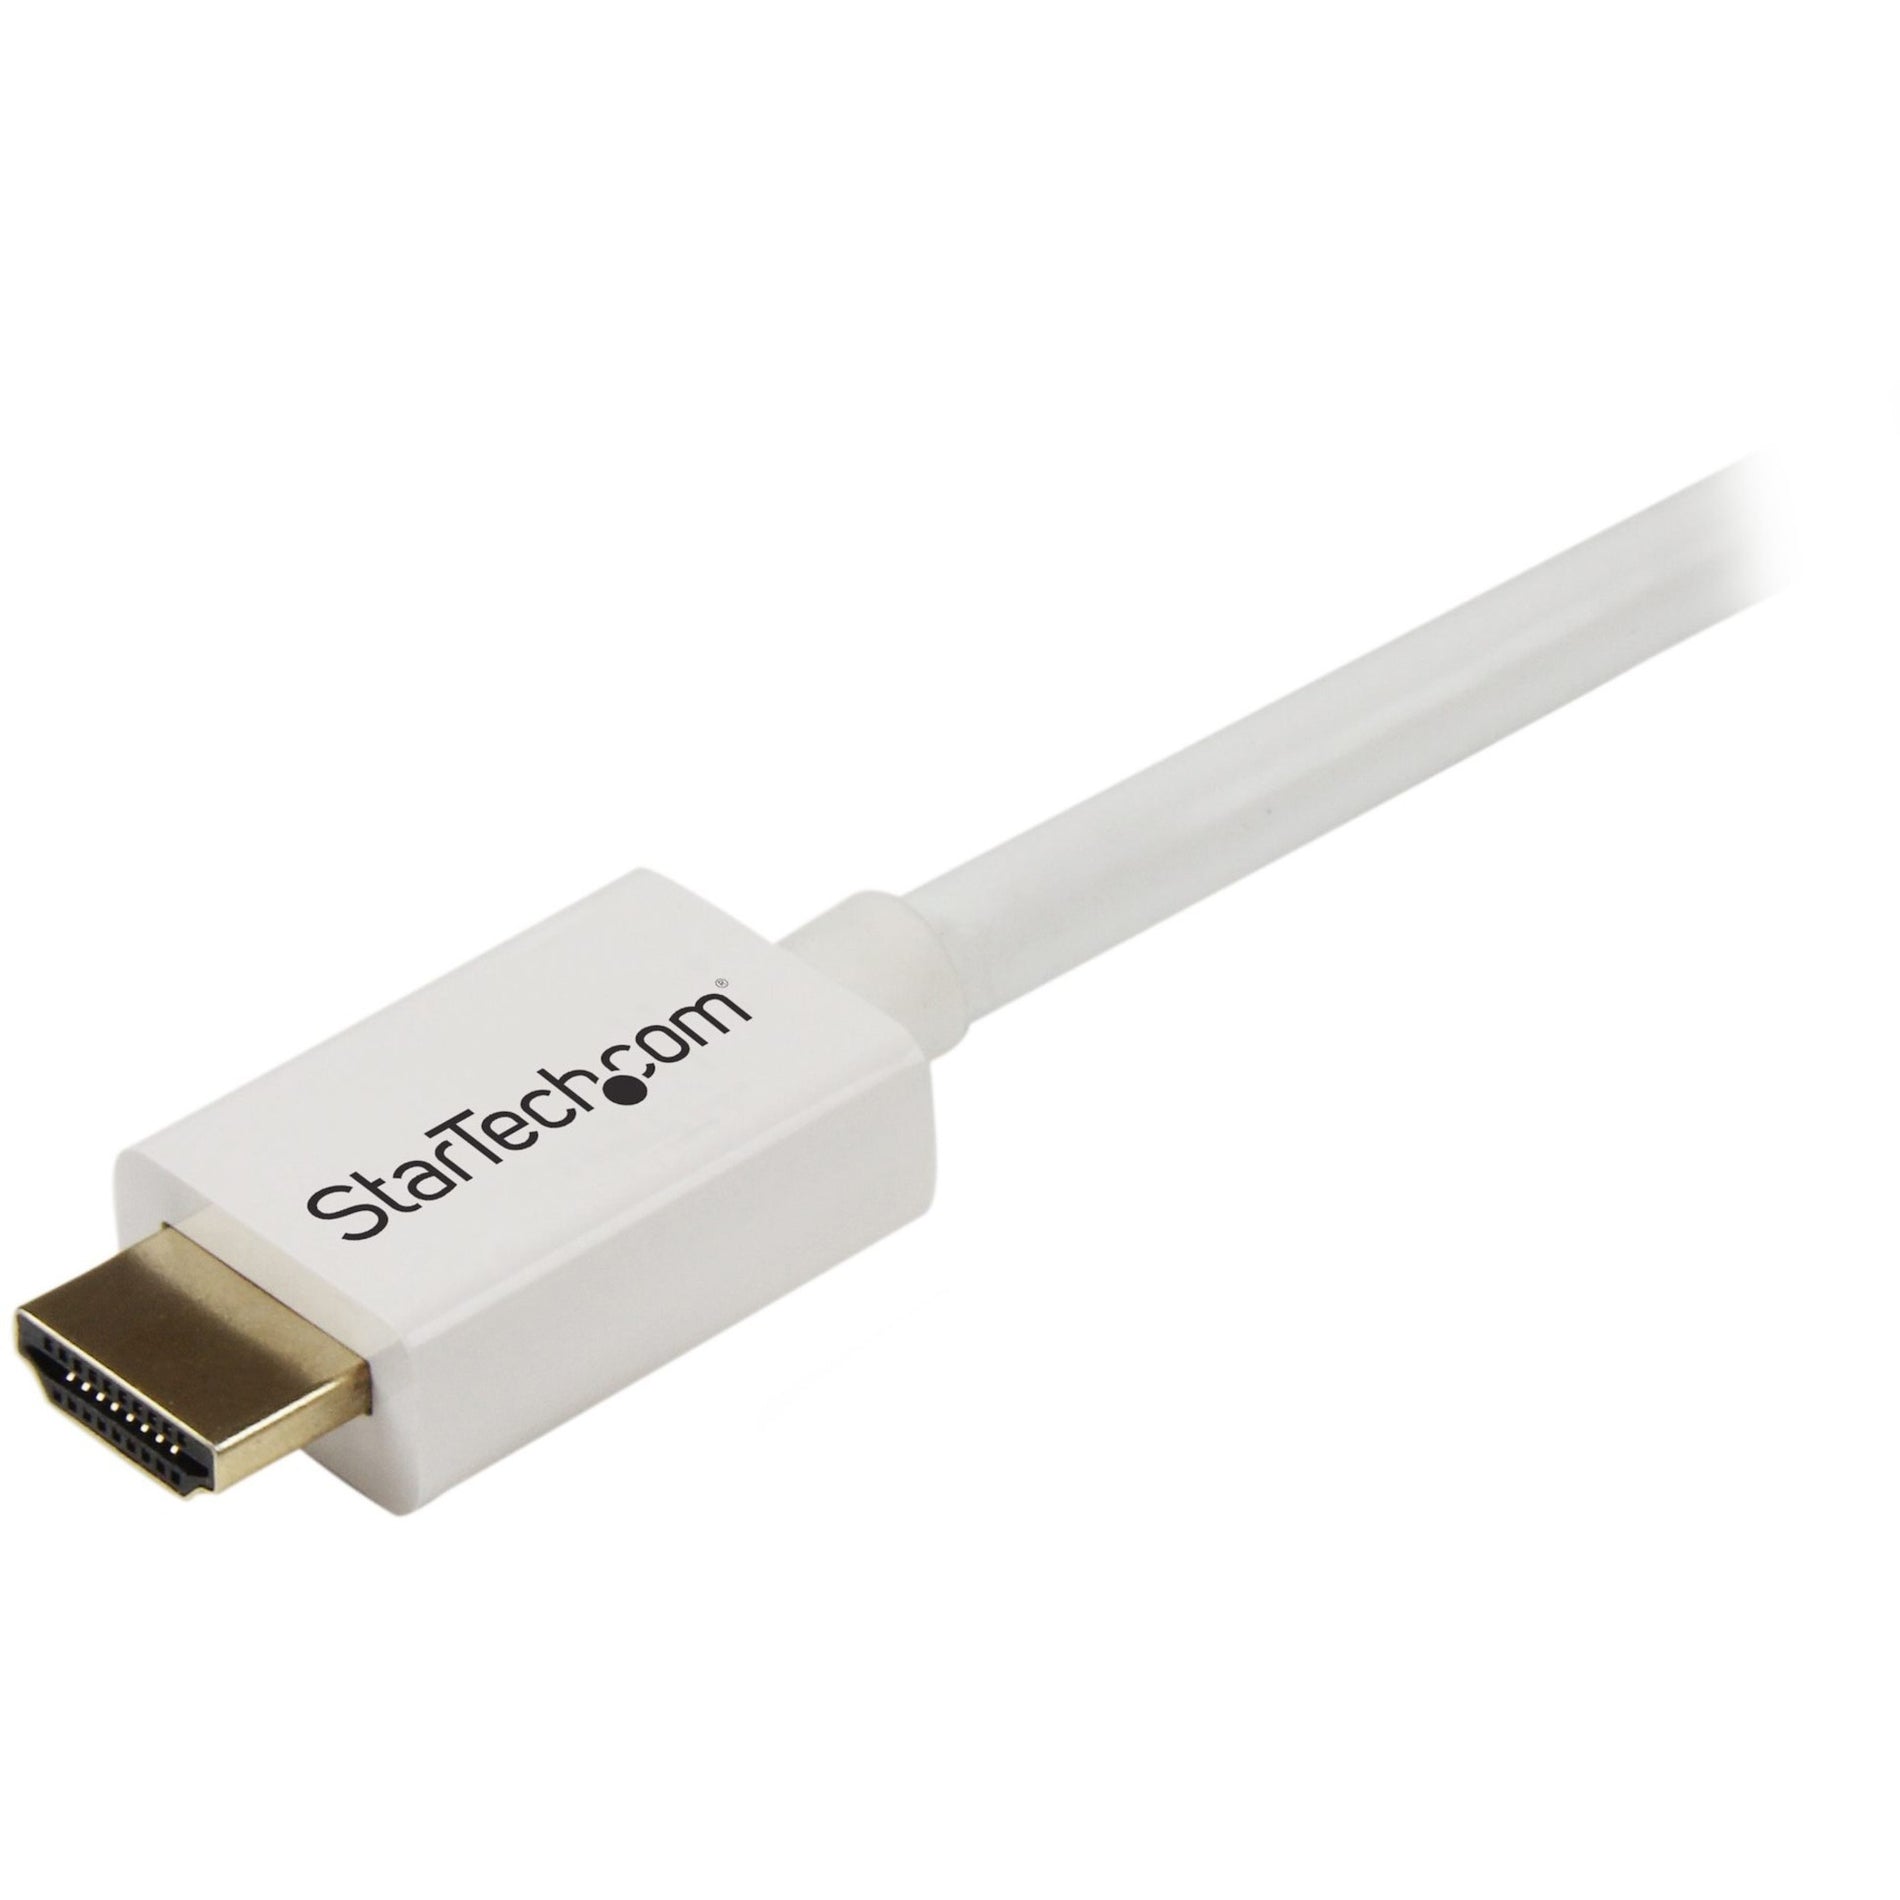 StarTech.com HD3MM7MW 7m (23 ft) White CL3 In-wall High Speed HDMI Cable - HDMI to HDMI - M/M, Audio Return Channel (ARC), HDCP 1.4, Consumer Electronics Control (CEC)